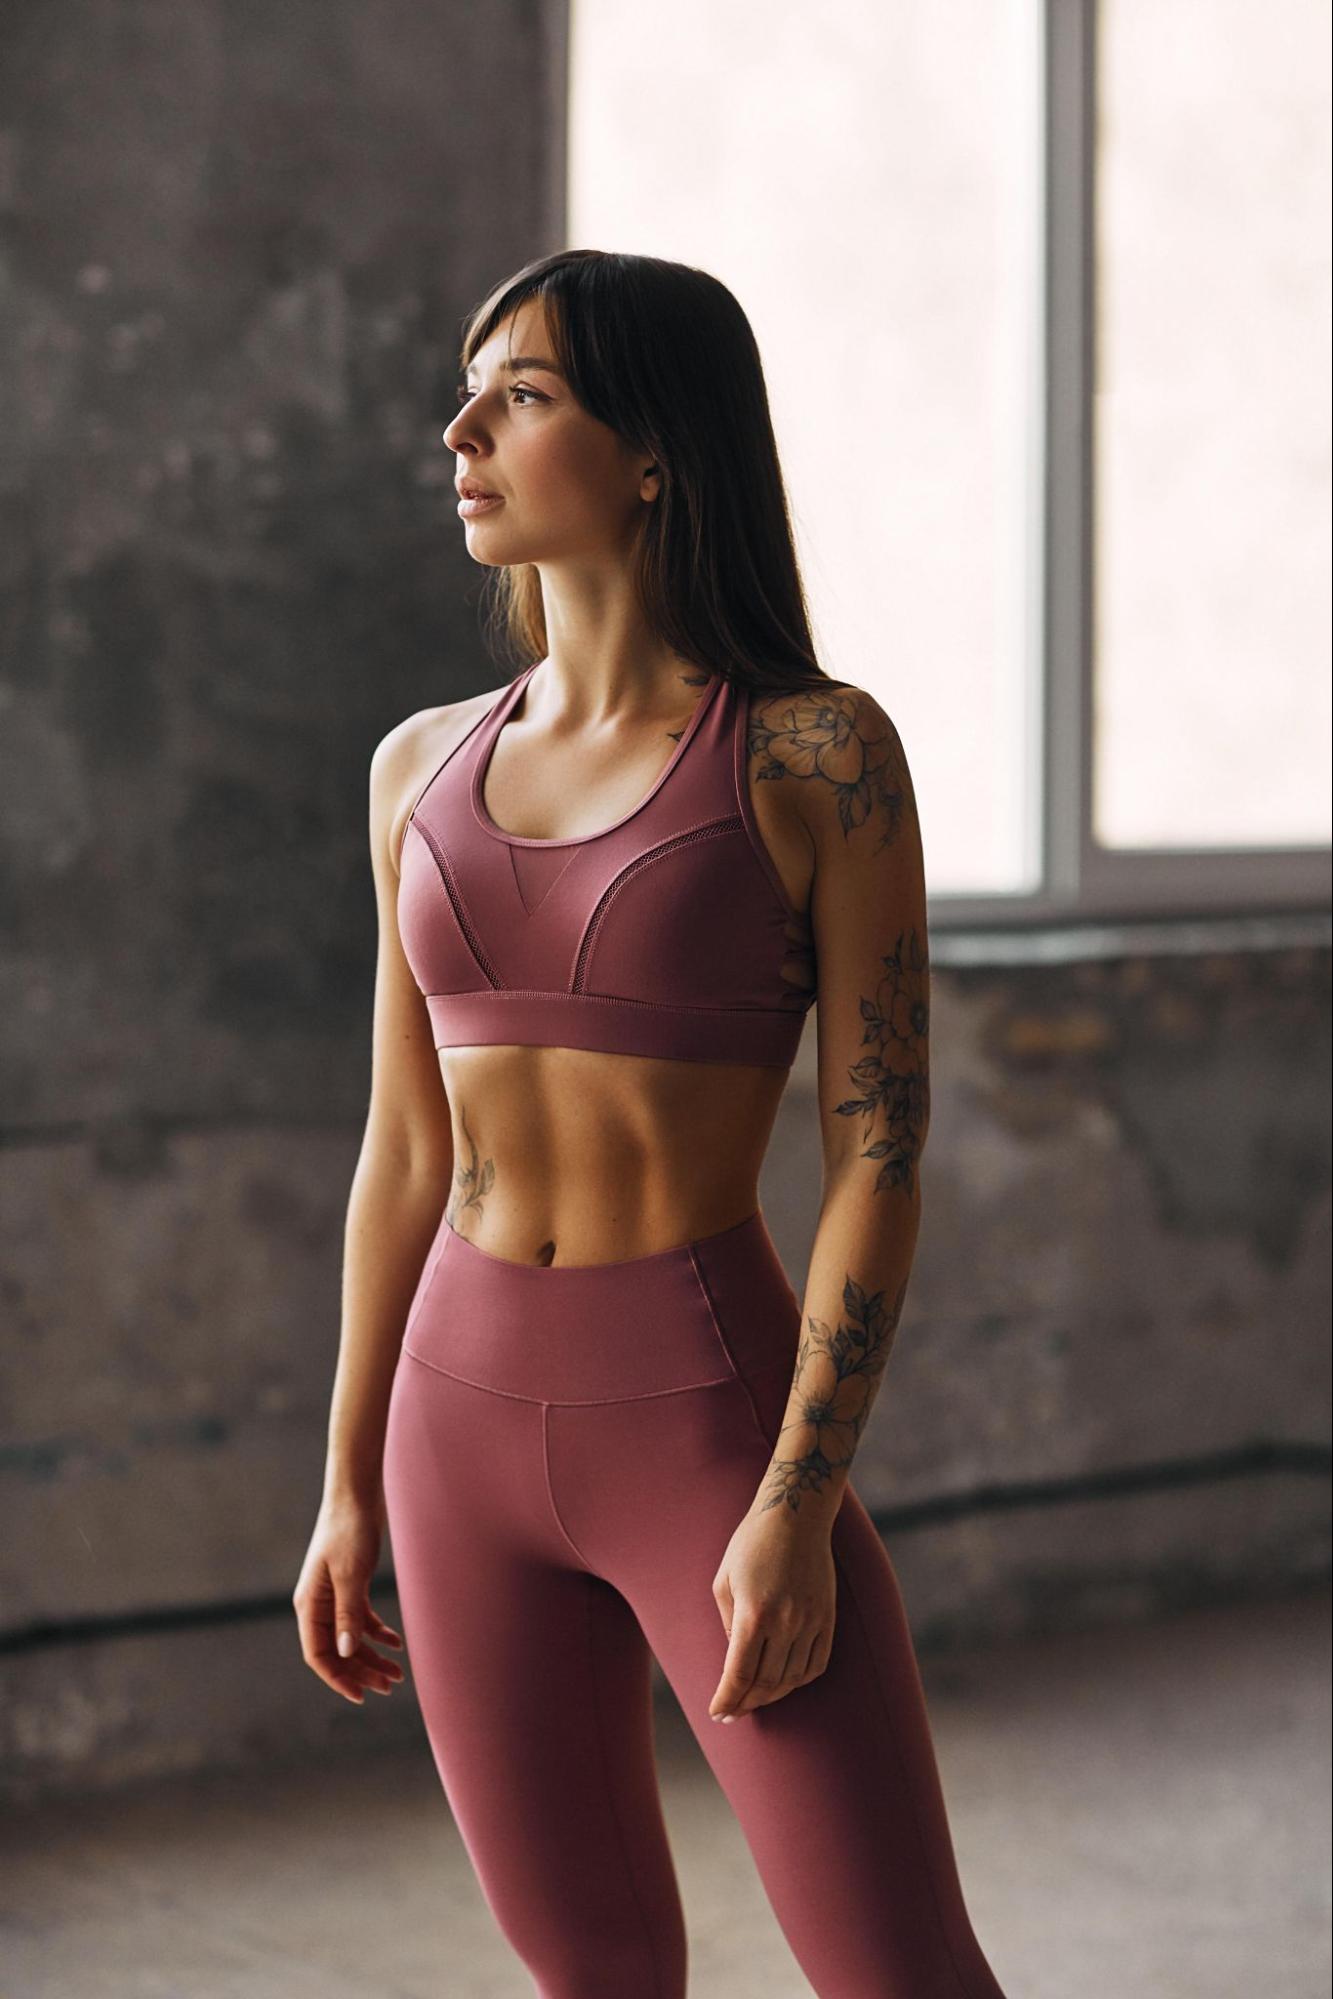 How Fitbox Is Challenging Fabletics and Lululemon